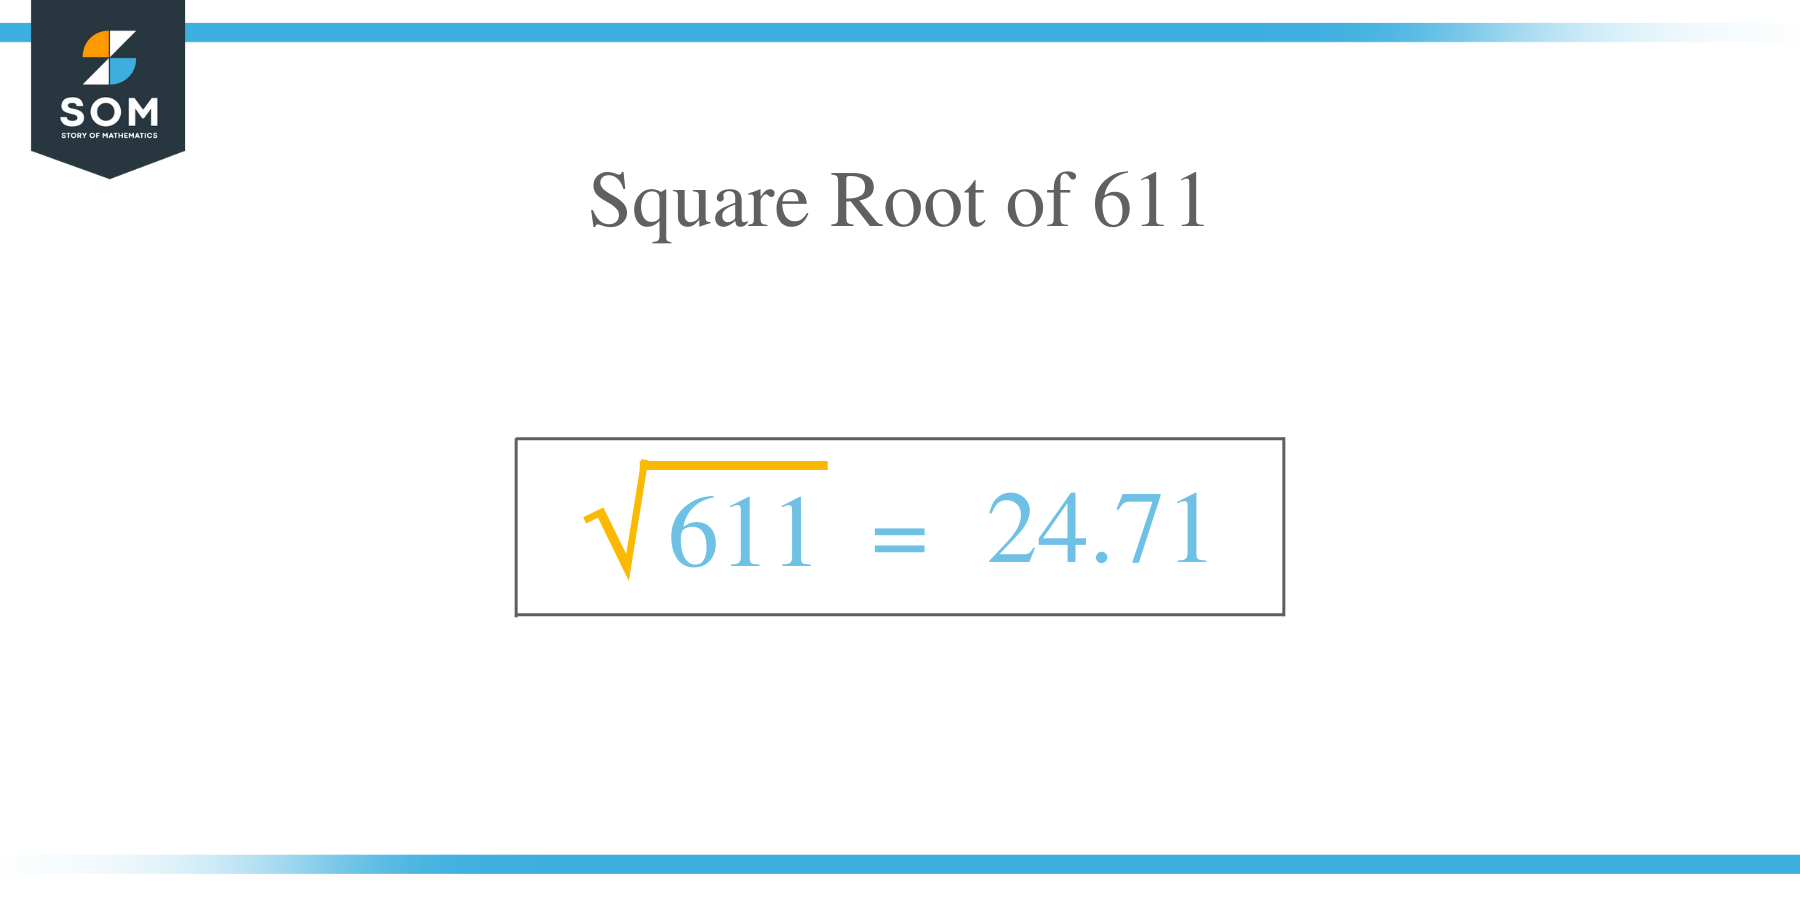 Square Root of 611